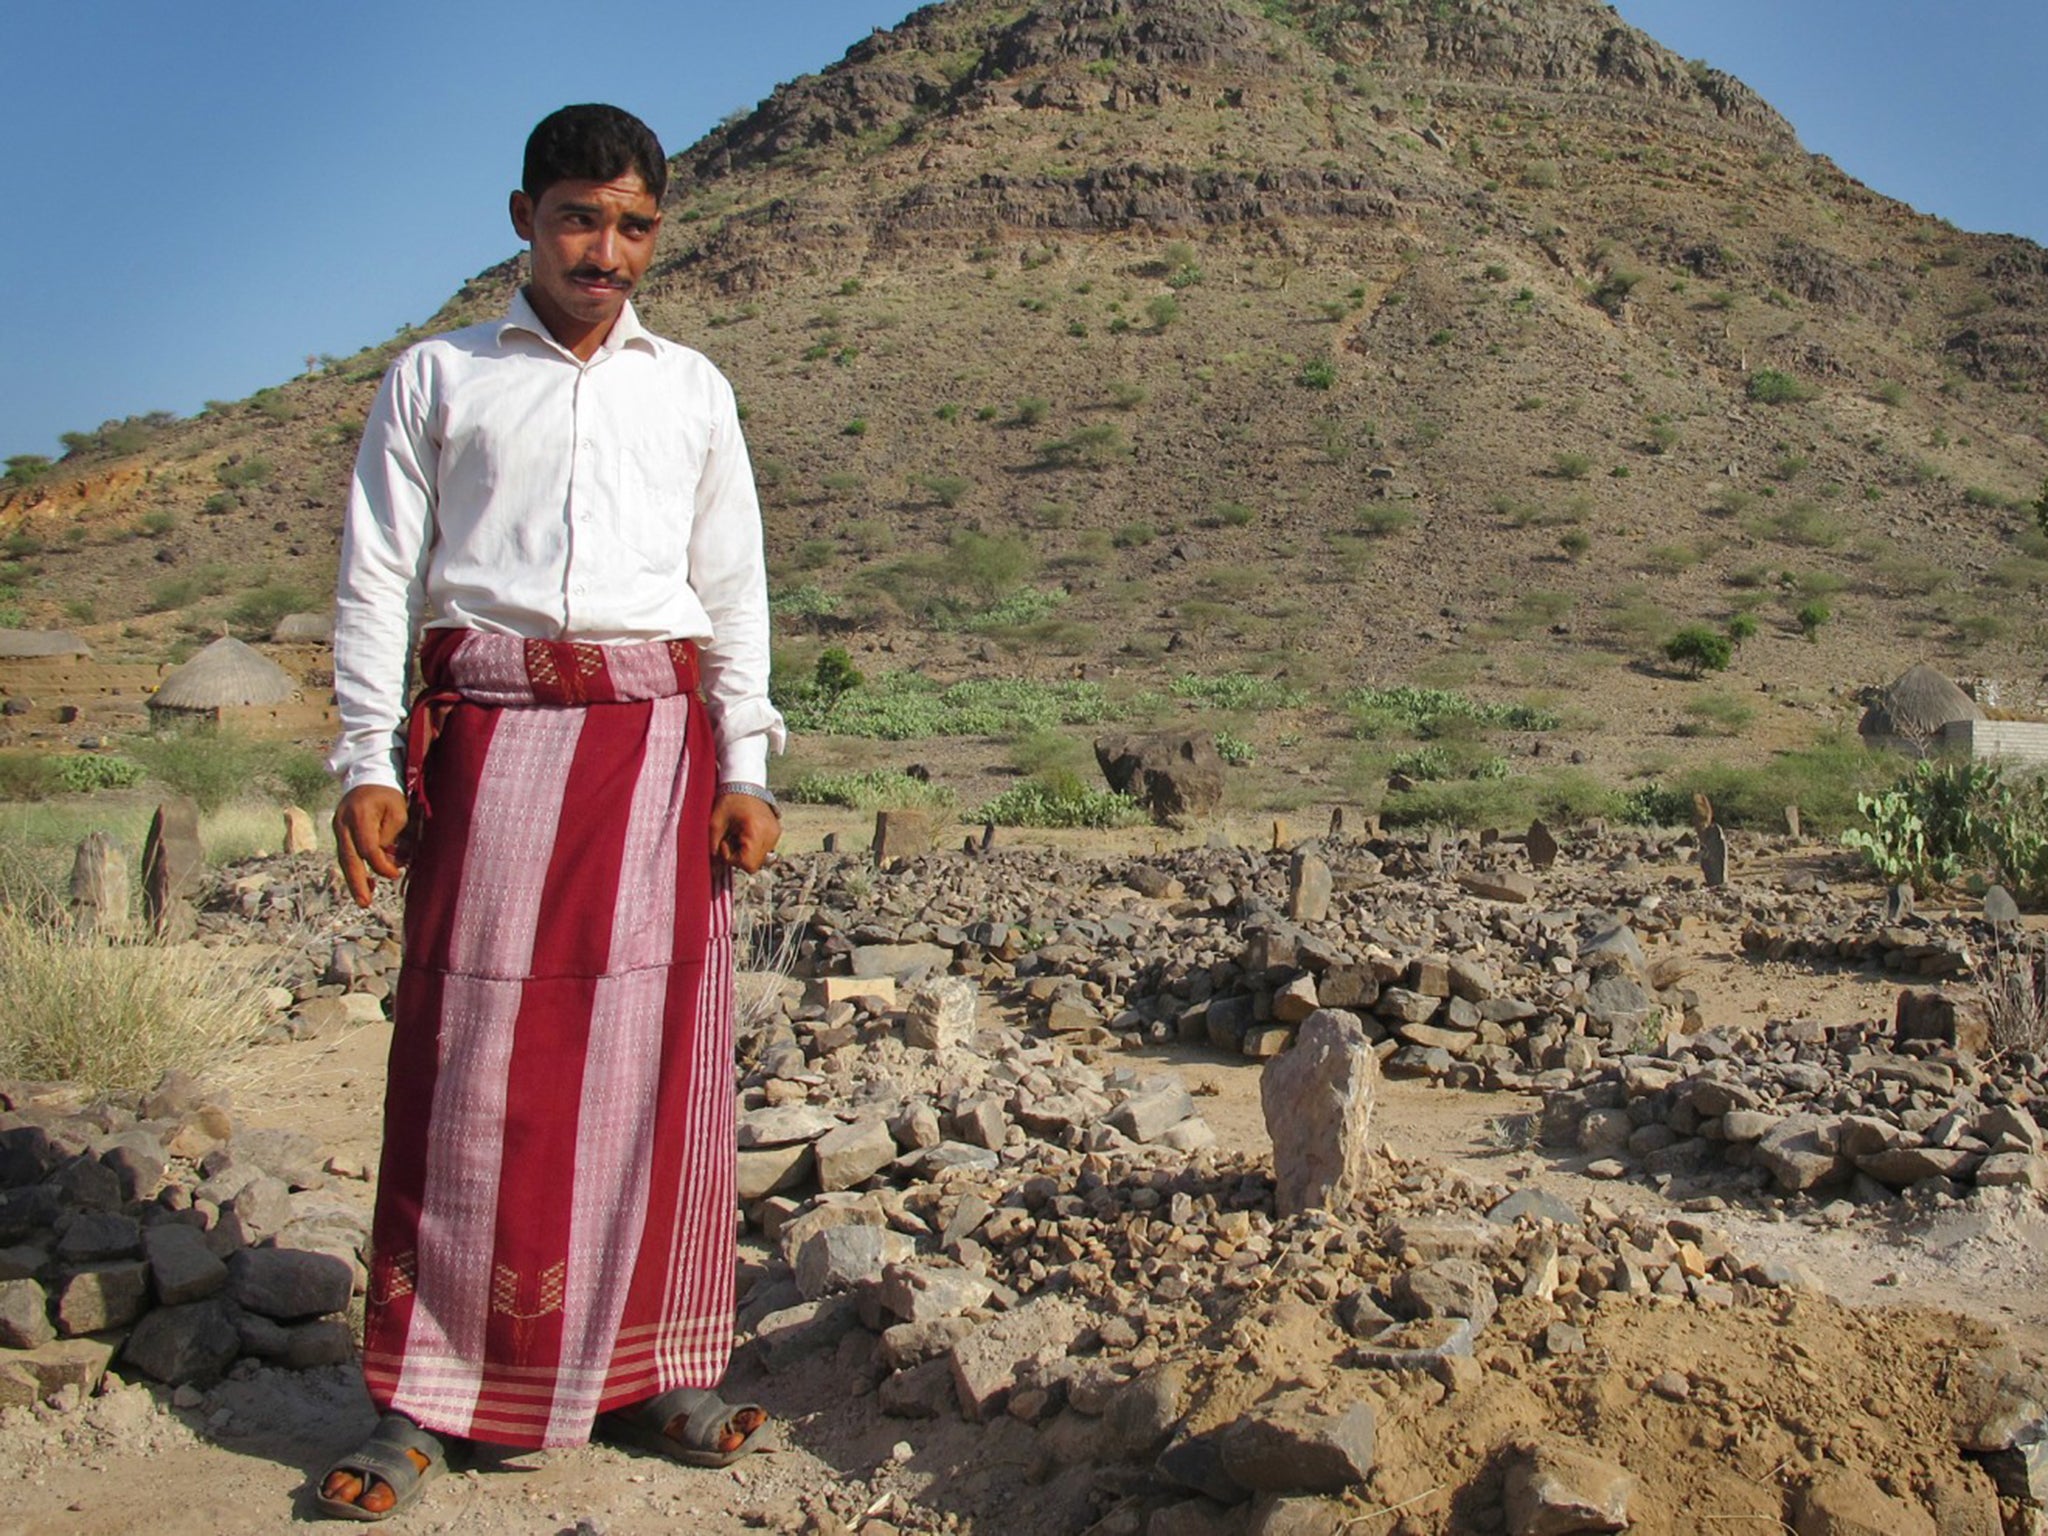 Abdul Fatah Baashami stands next to grave of his only child, Nabil, who died of hunger. He was 14 months old